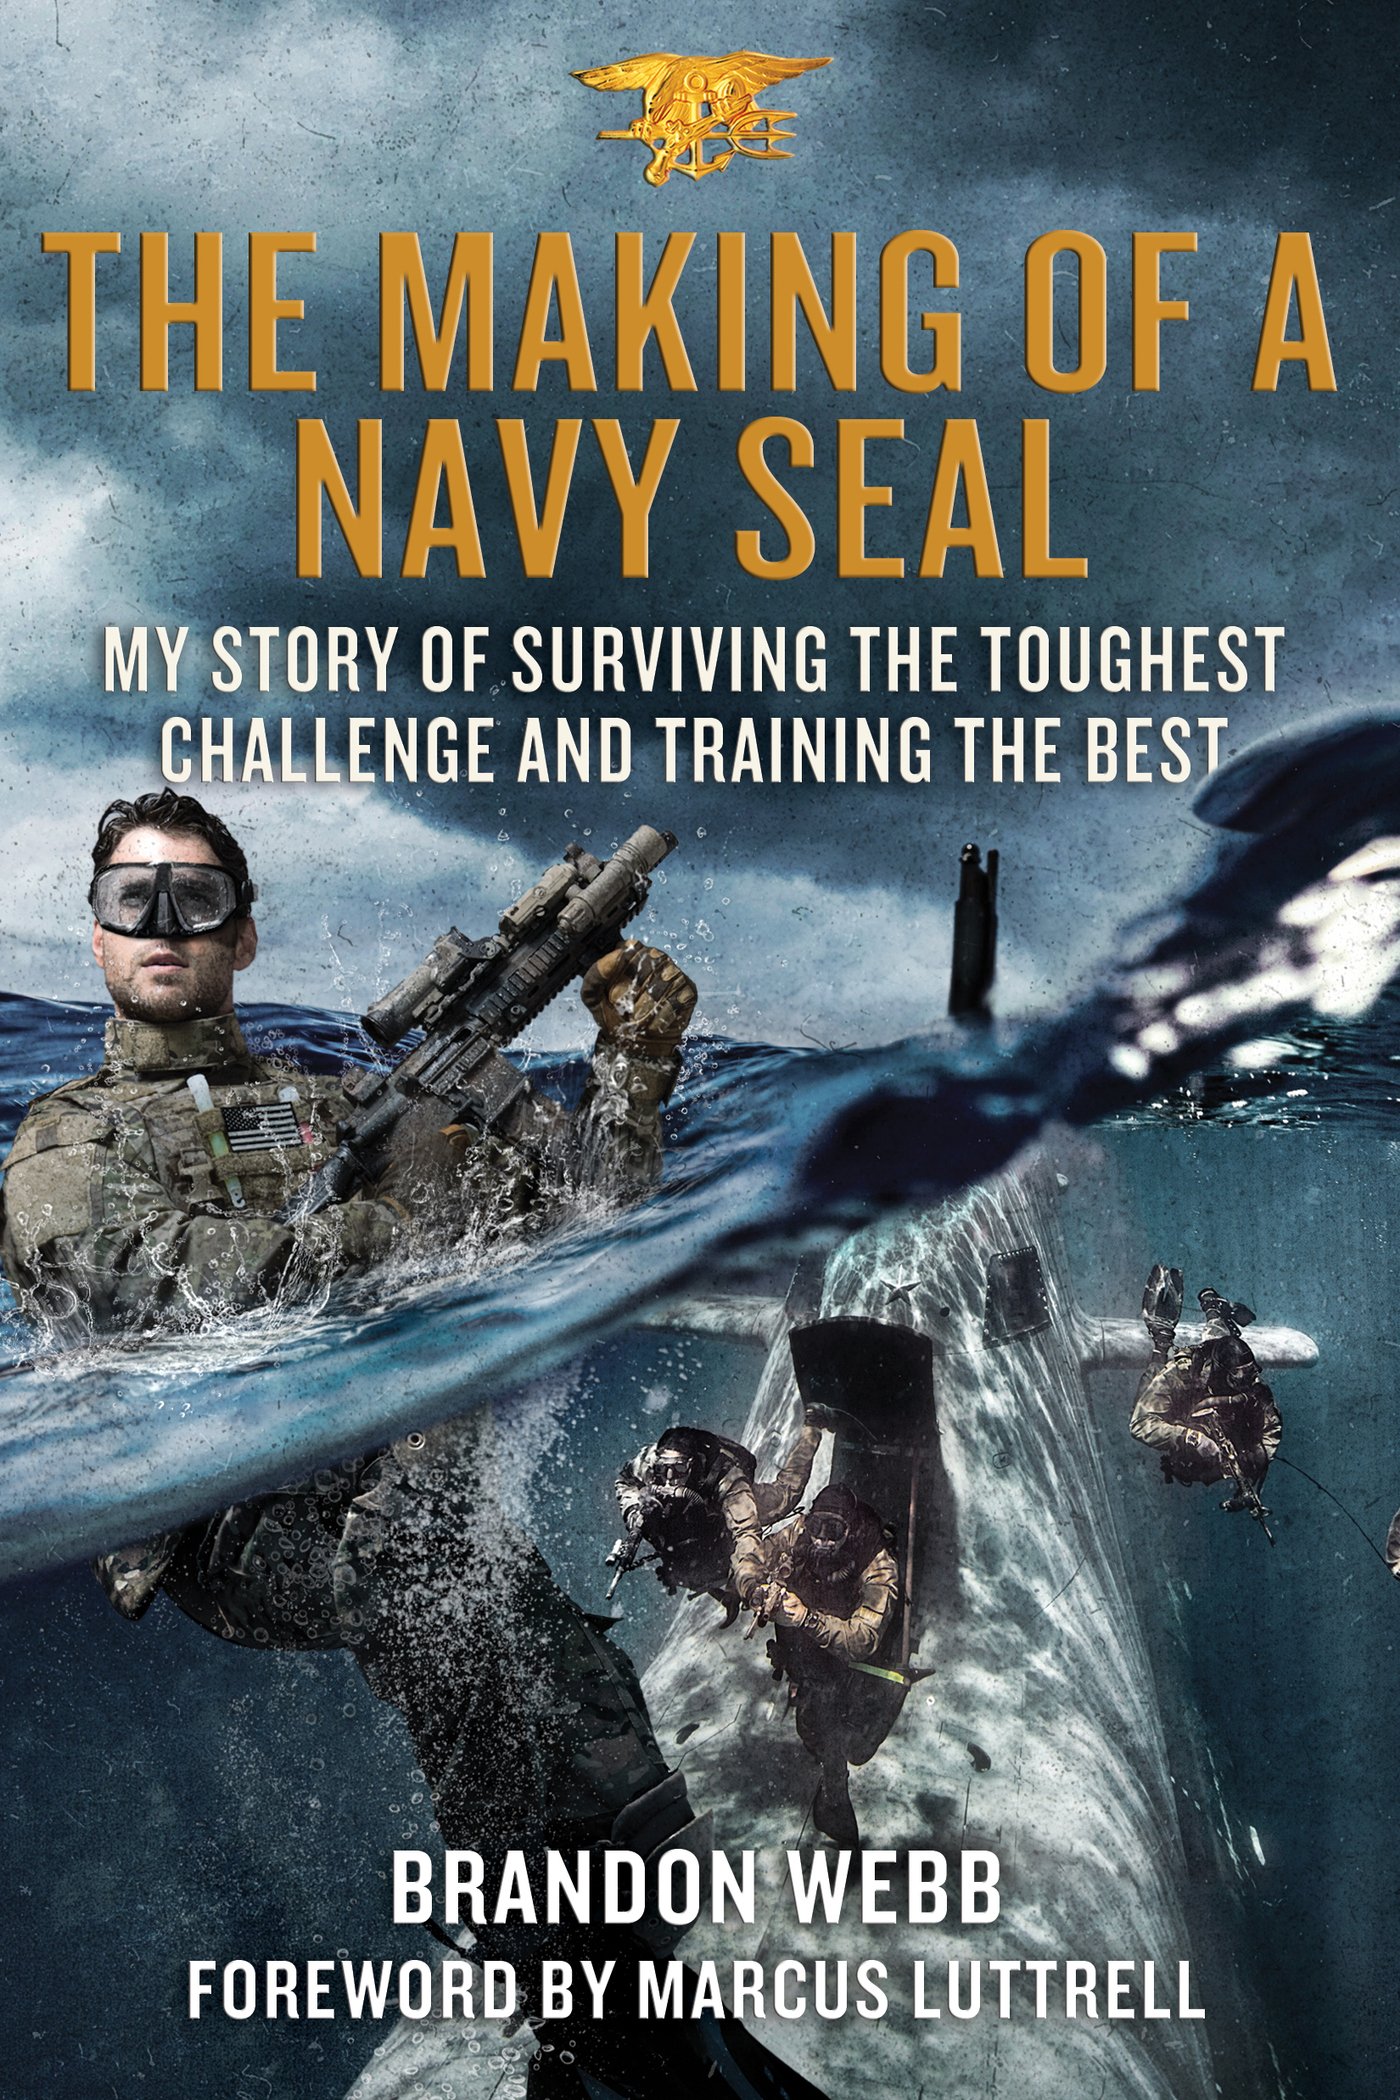 Simple Navy seal workout book for push your ABS